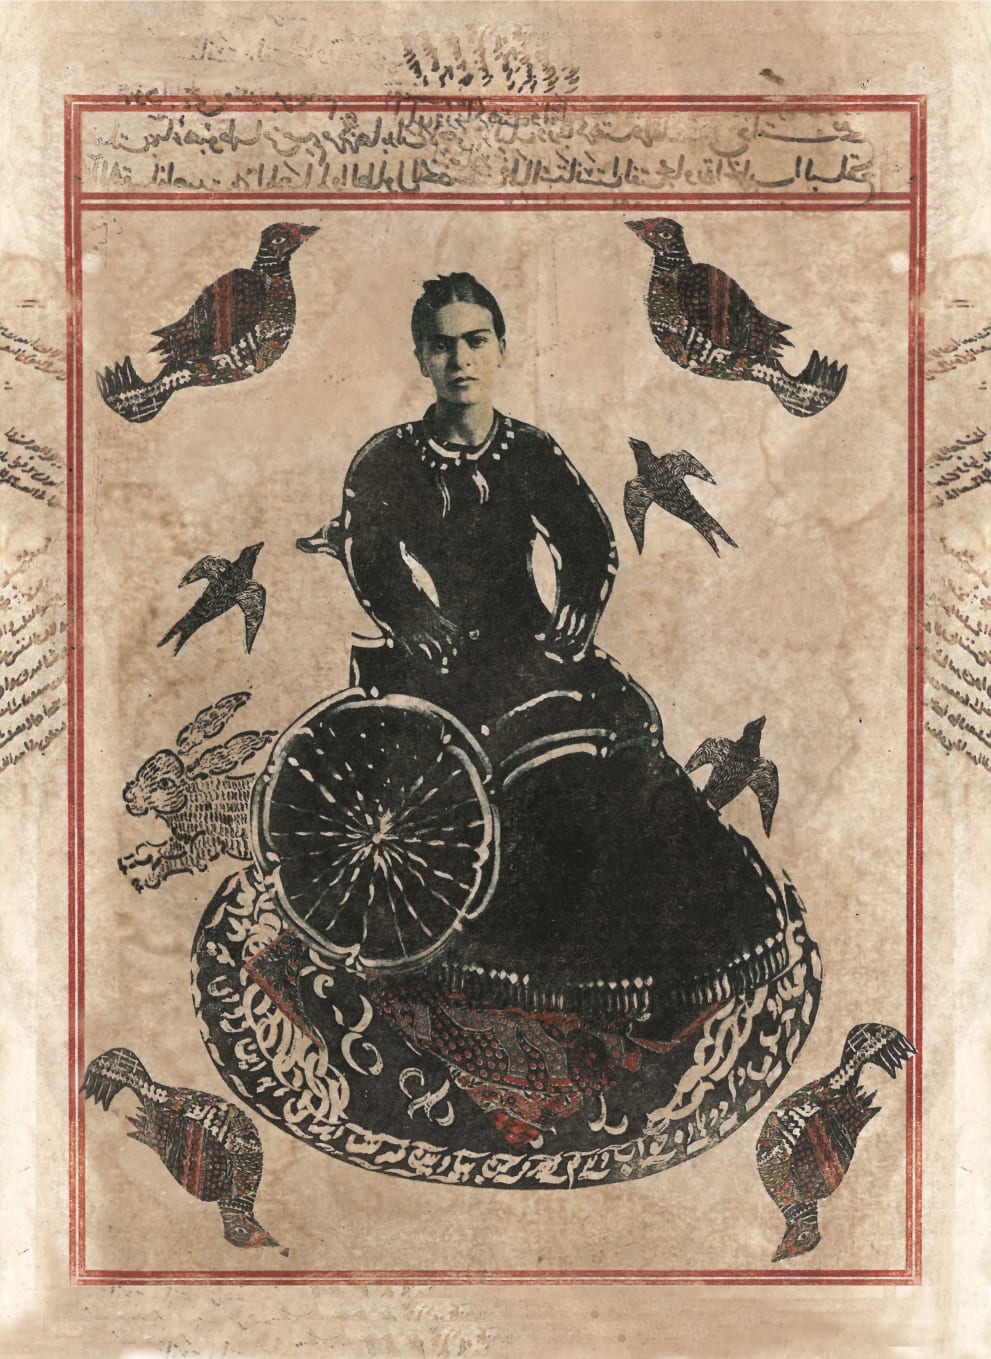 Black ink print of Frida Kahlo on paper dyed a mottled light brown, with red lines framing the image, black calligraphy in Arabic, and other abstract black and red bird images